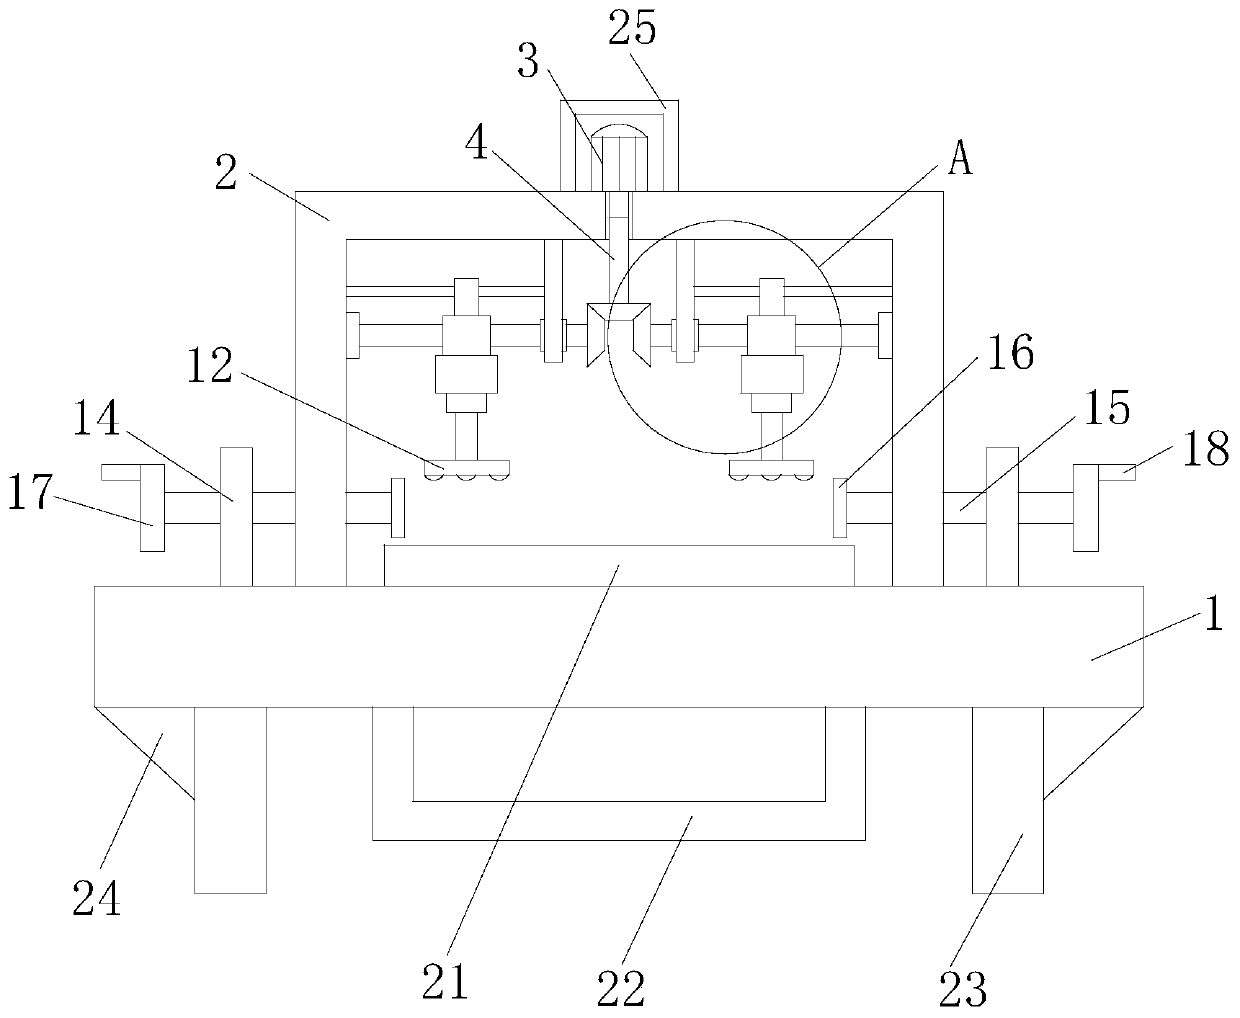 Board positioning device for furniture processing equipment